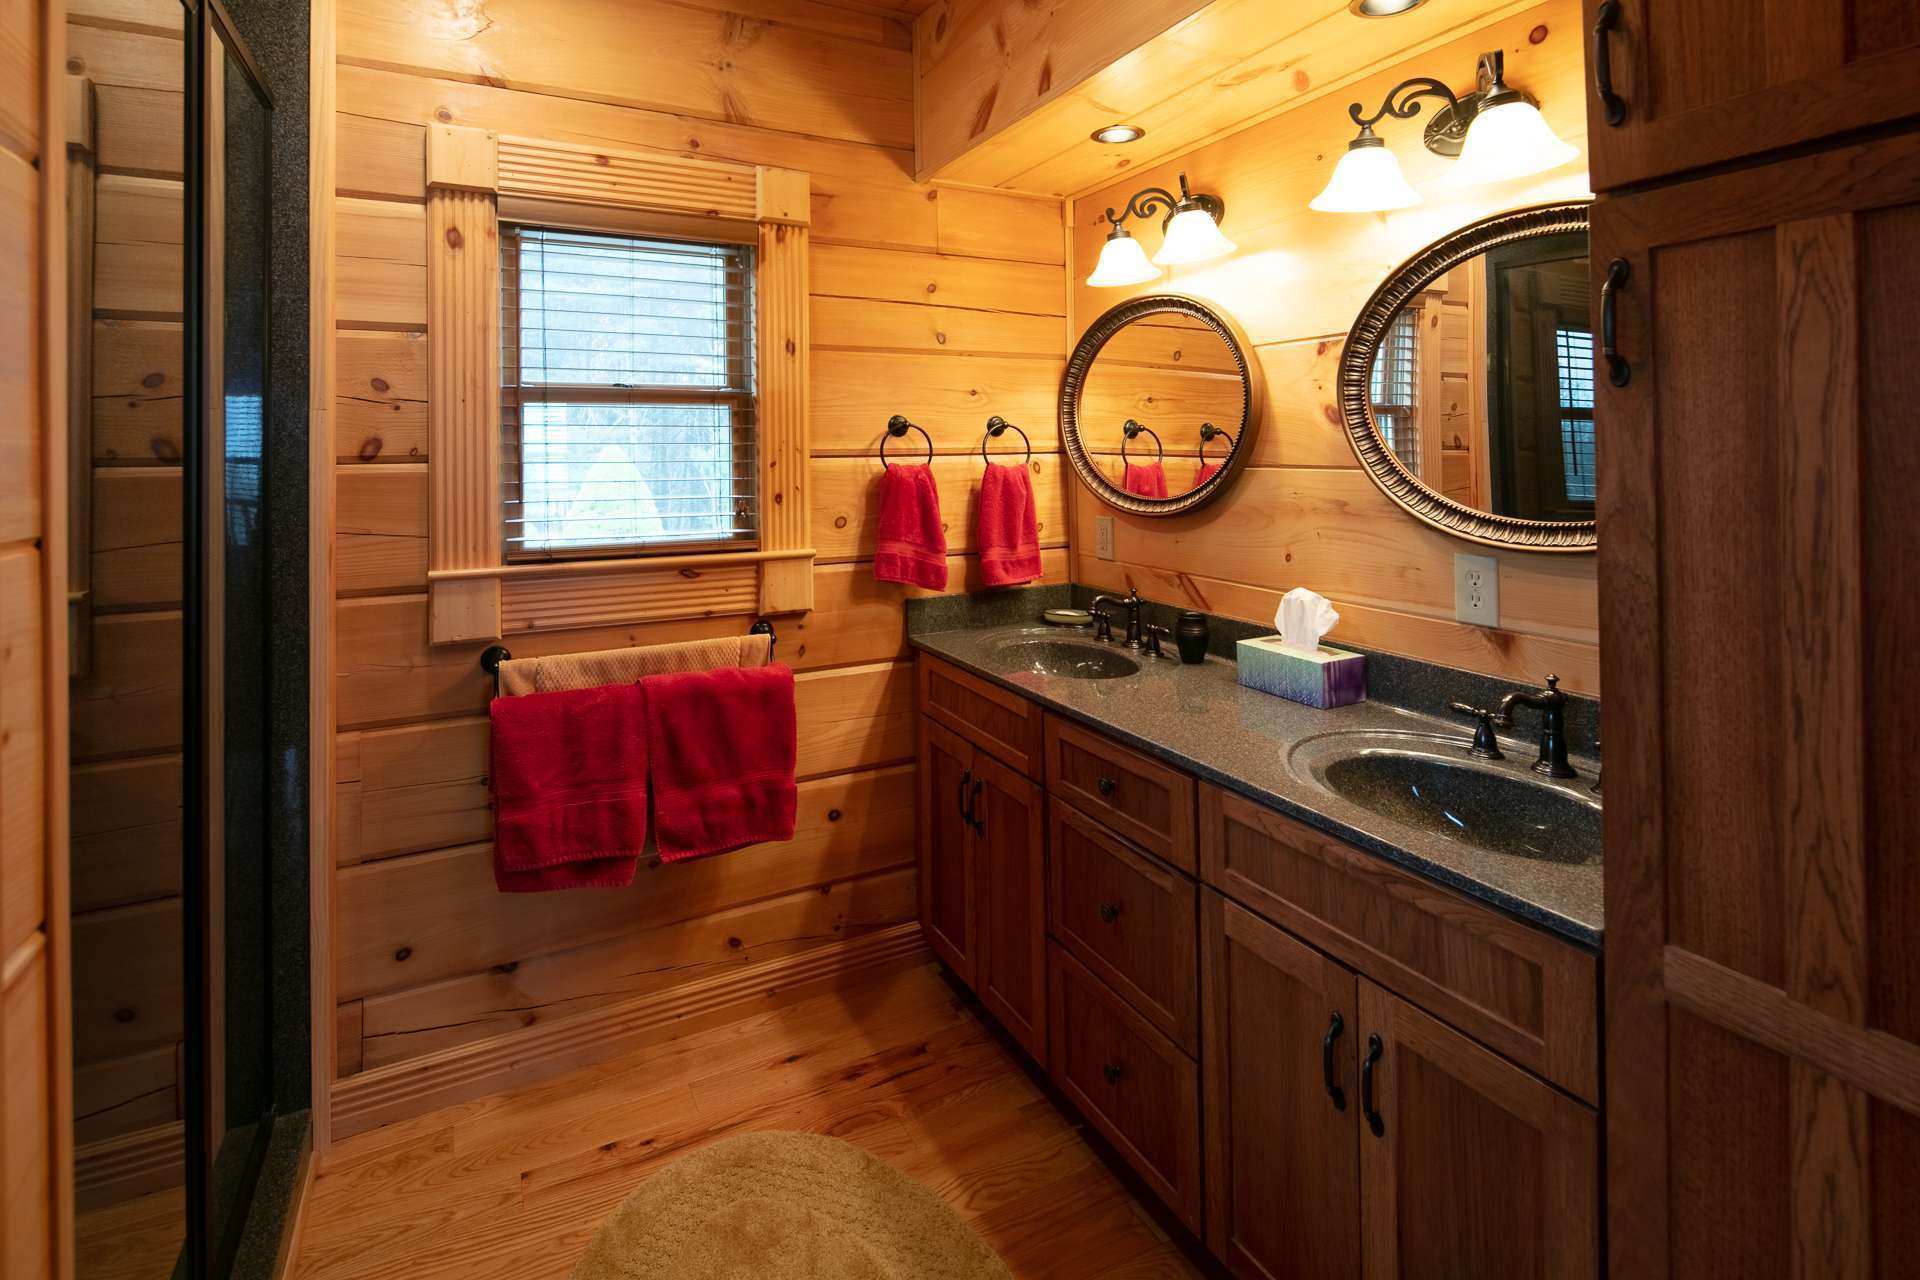 The master bath features double vanities and walk-in shower. A half bath completes the main level of the home.